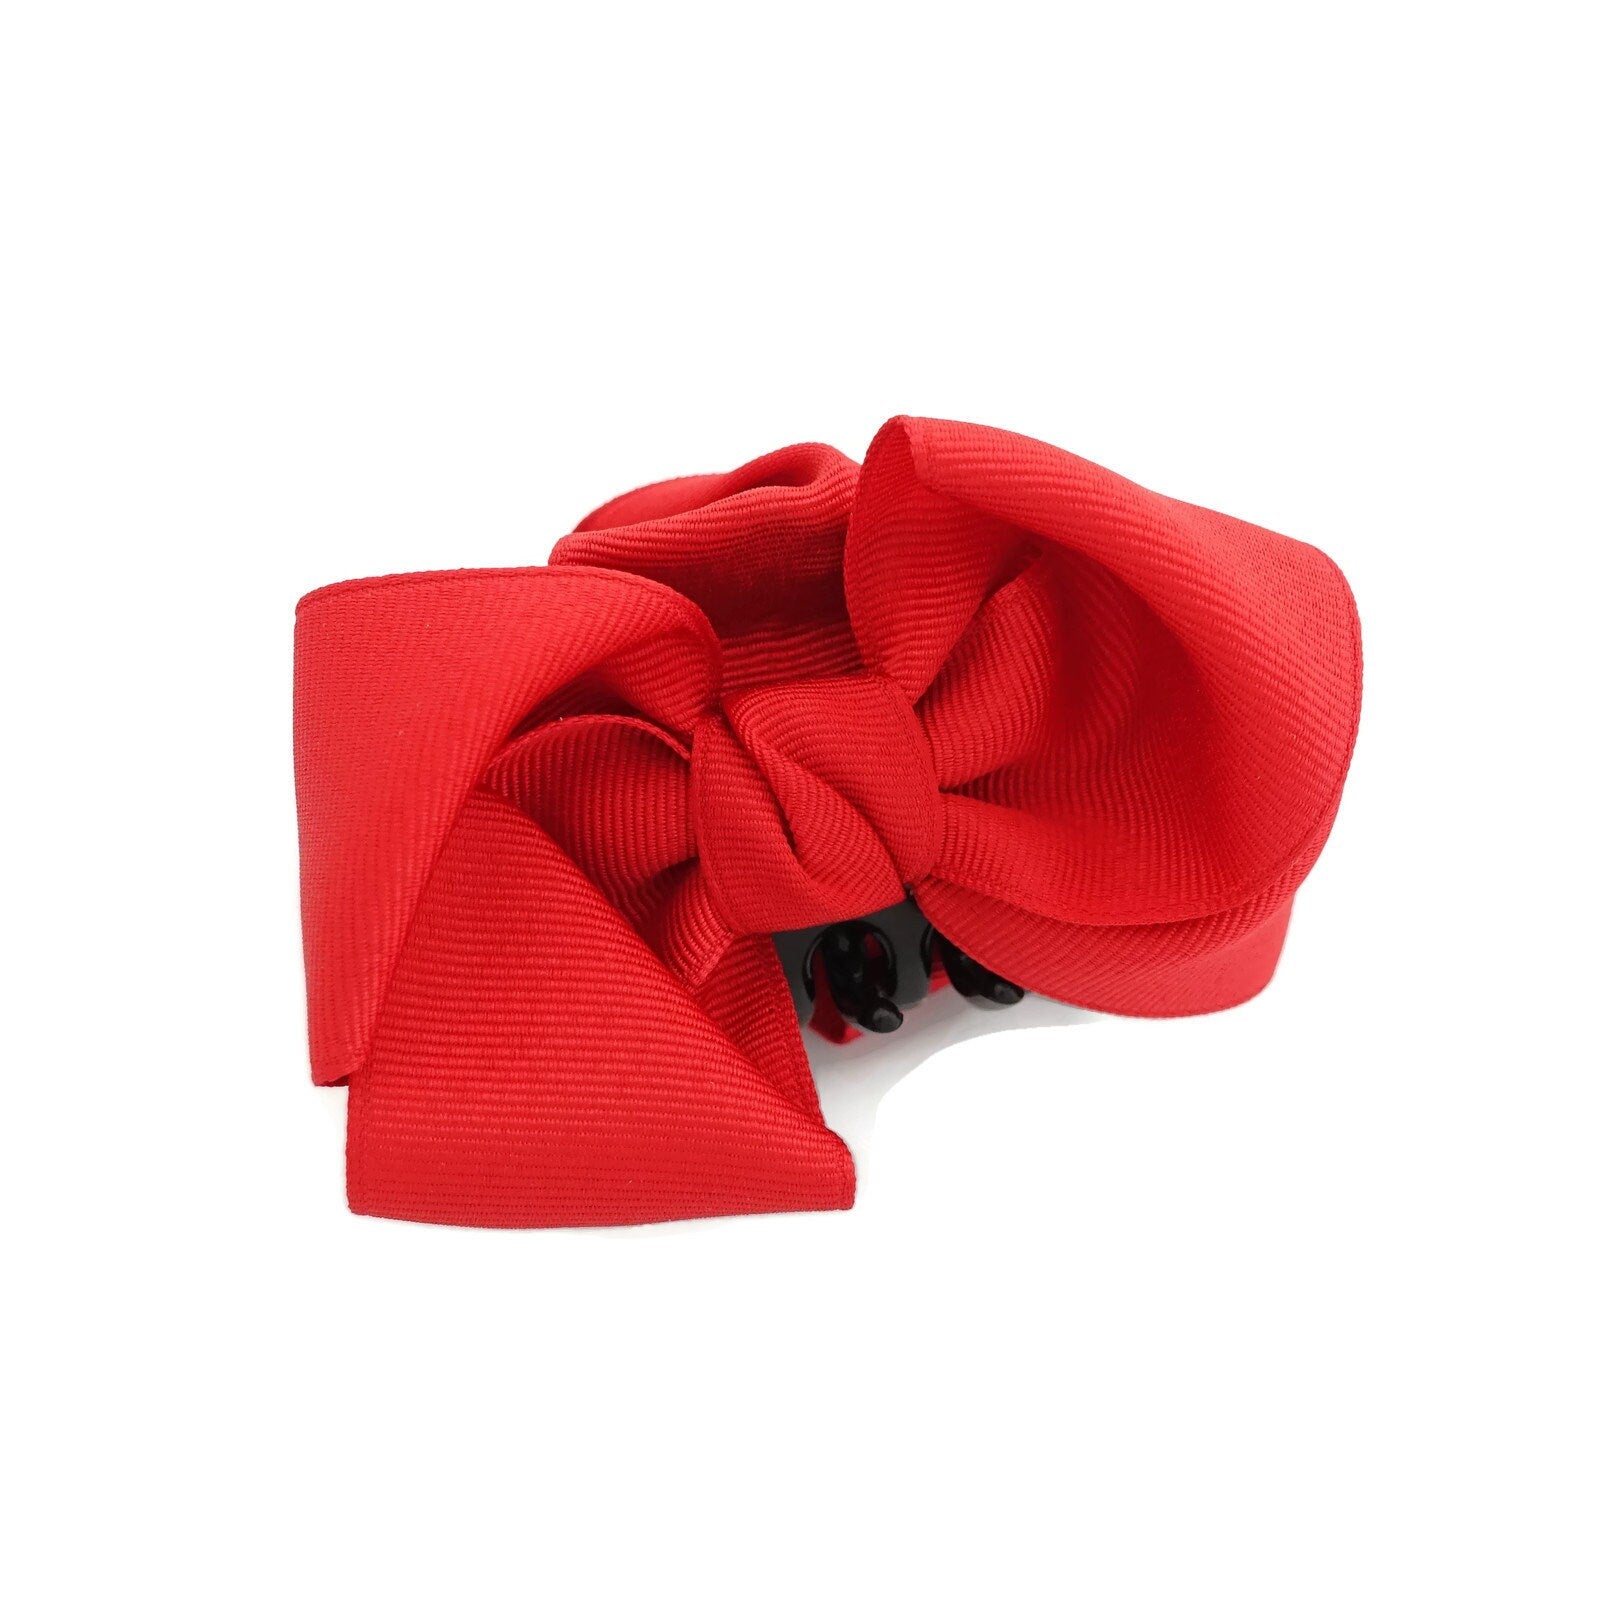 VeryShine claw/banana/barrette Red Handmade Grosgrain bow hair claw clip Fabric Bow Butterfly Wing Hair Jaw Claw Clip Women Hair Accessory